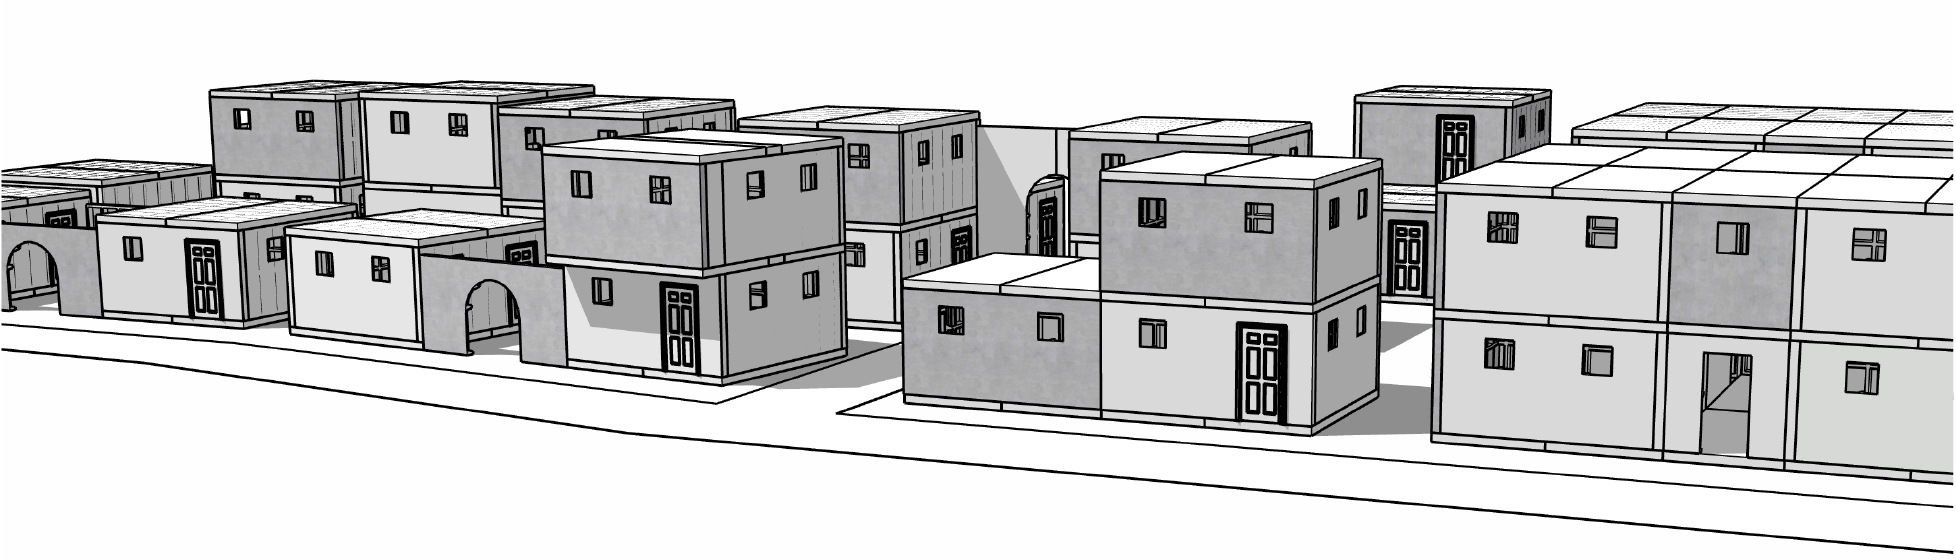 A drawing of some buildings in the middle of a street.